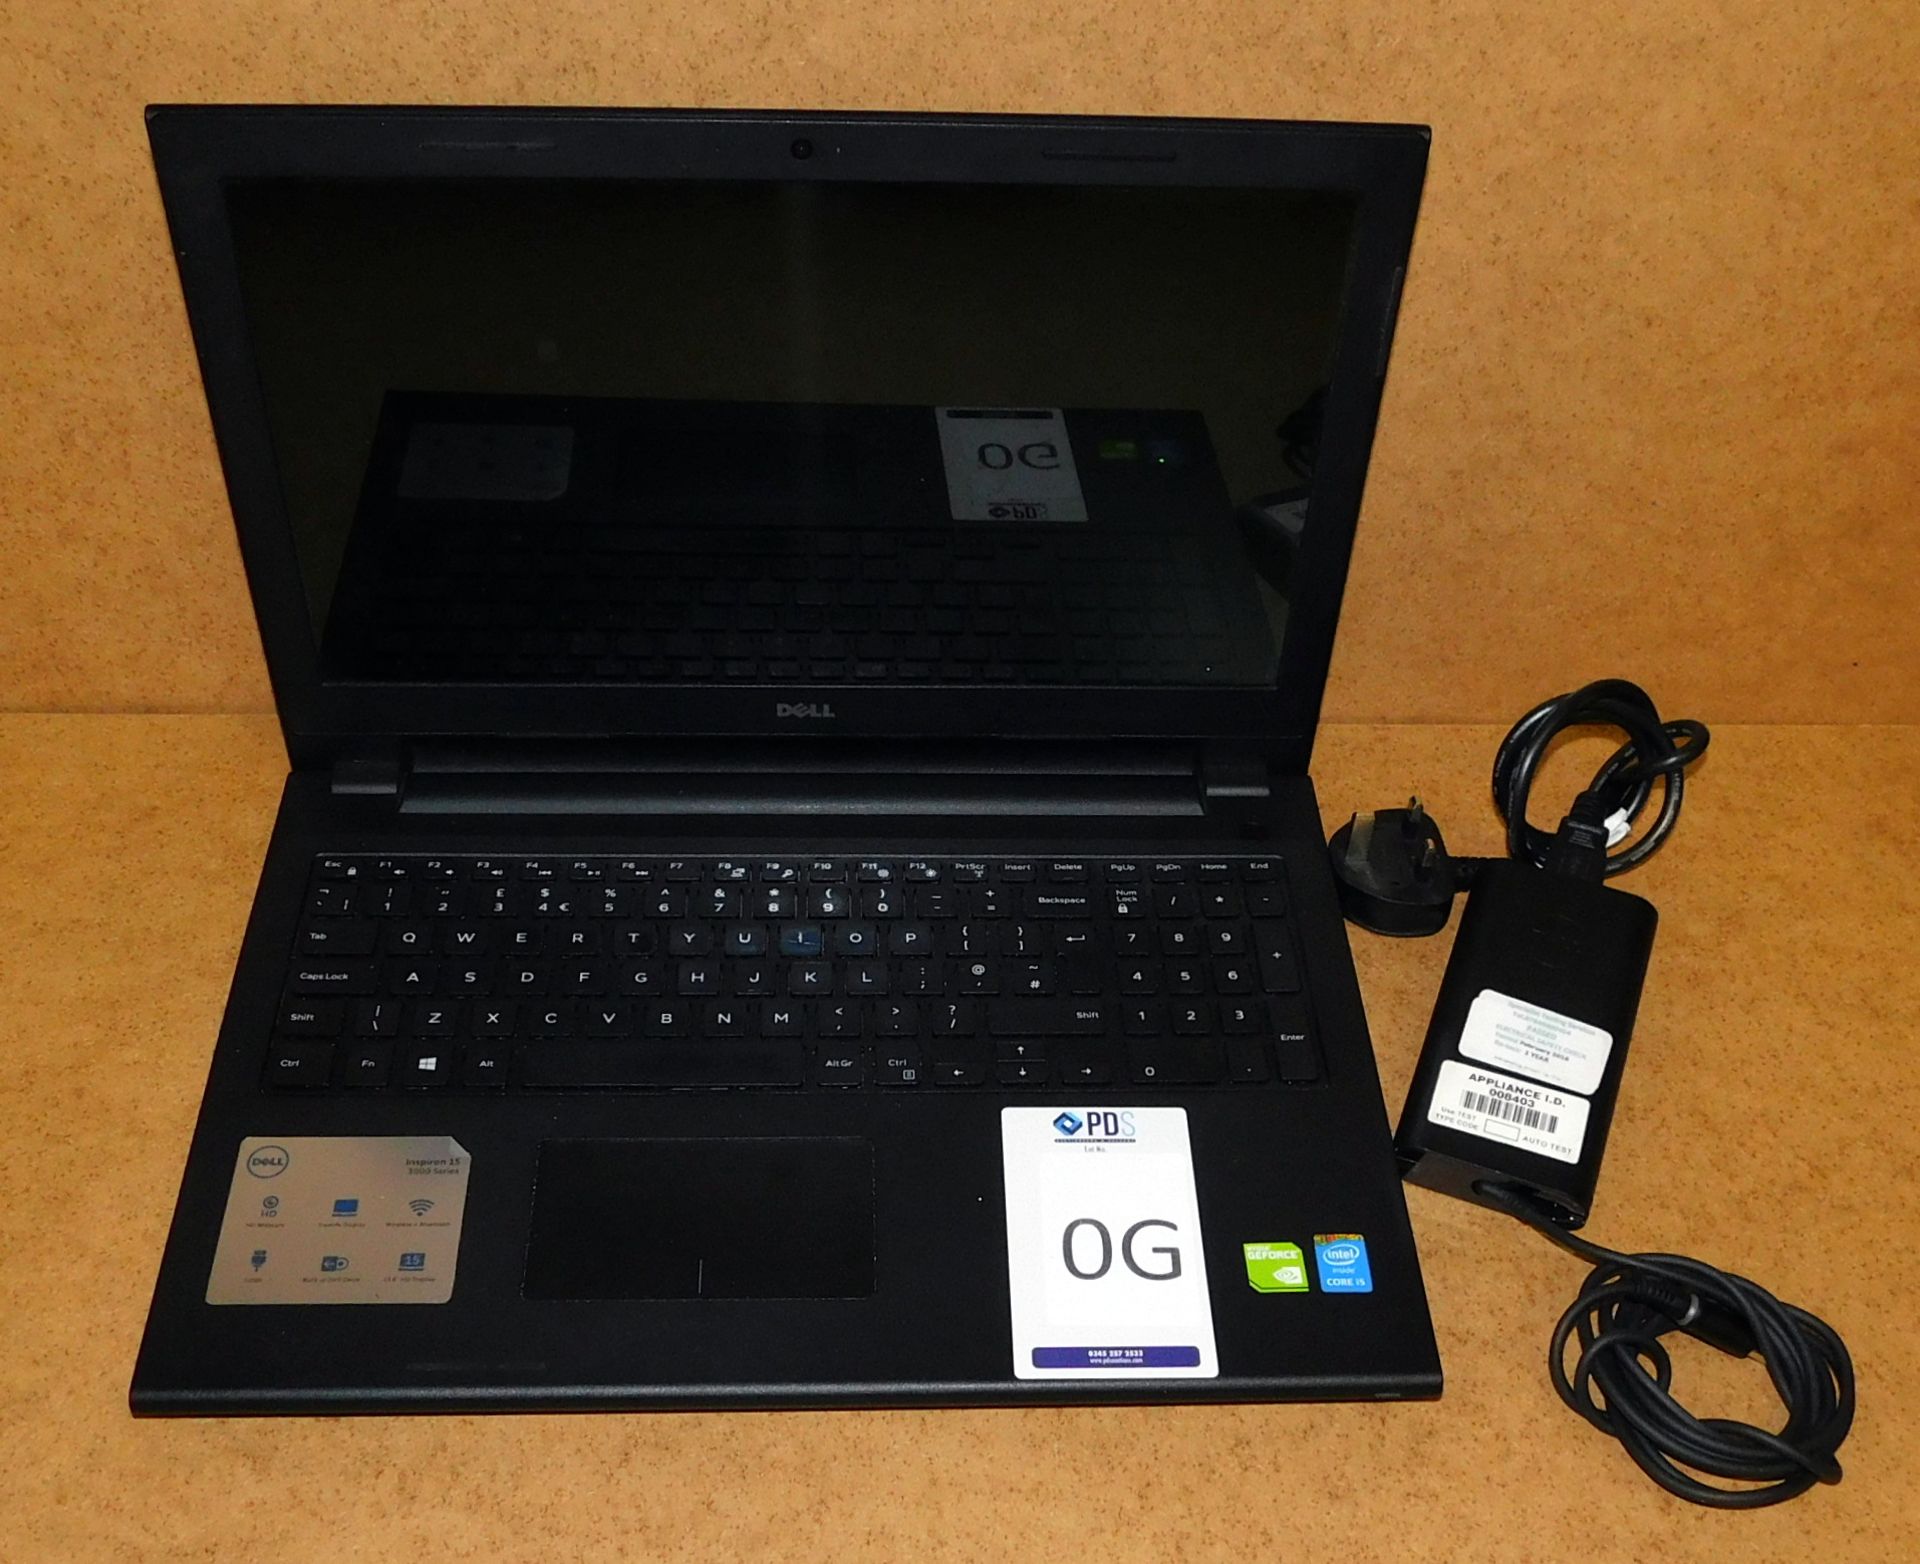 Dell Inspiron 15 3000 Series Laptop, i5 Processor, 500 GB HDD with Charger